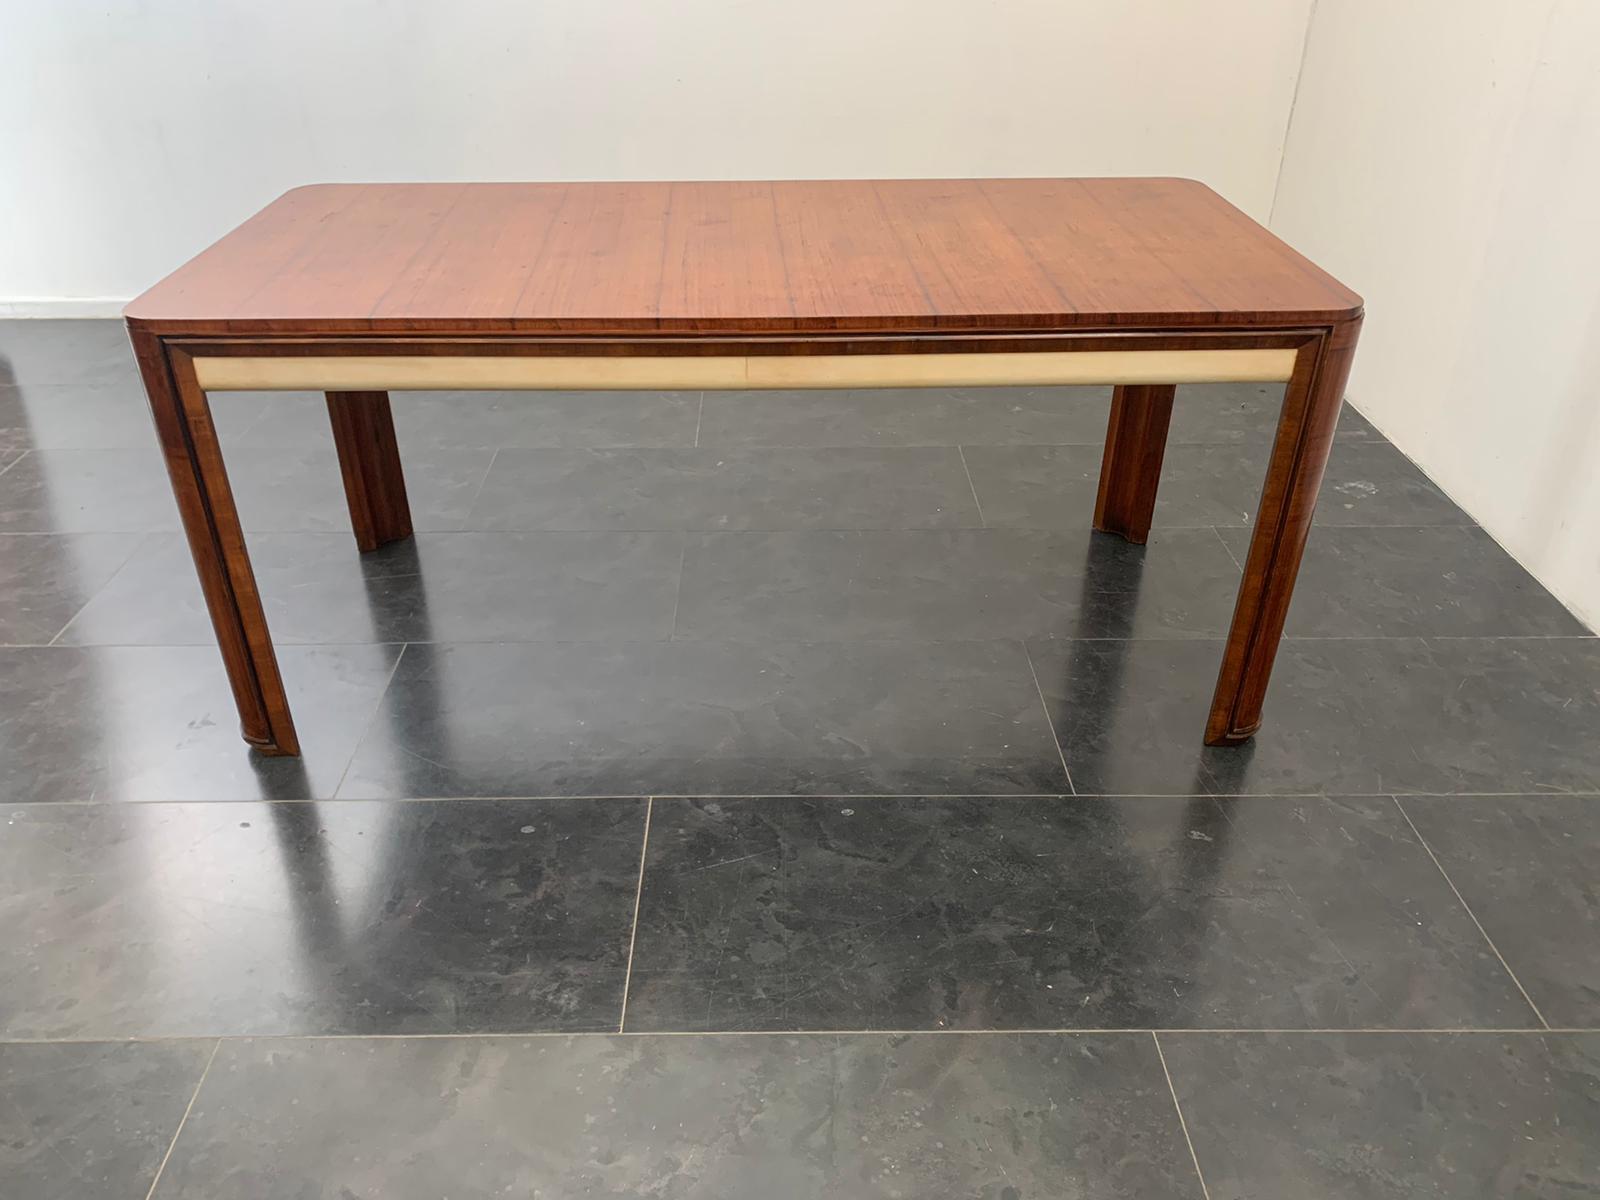 Art Deco Table in Rosewood and Parchment by Pietro Busnelli.
Packaging with bubble wrap and cardboard boxes is included. If the wooden packaging is needed (crates or boxes) for US and International Shipping, it's required a separate cost (will be